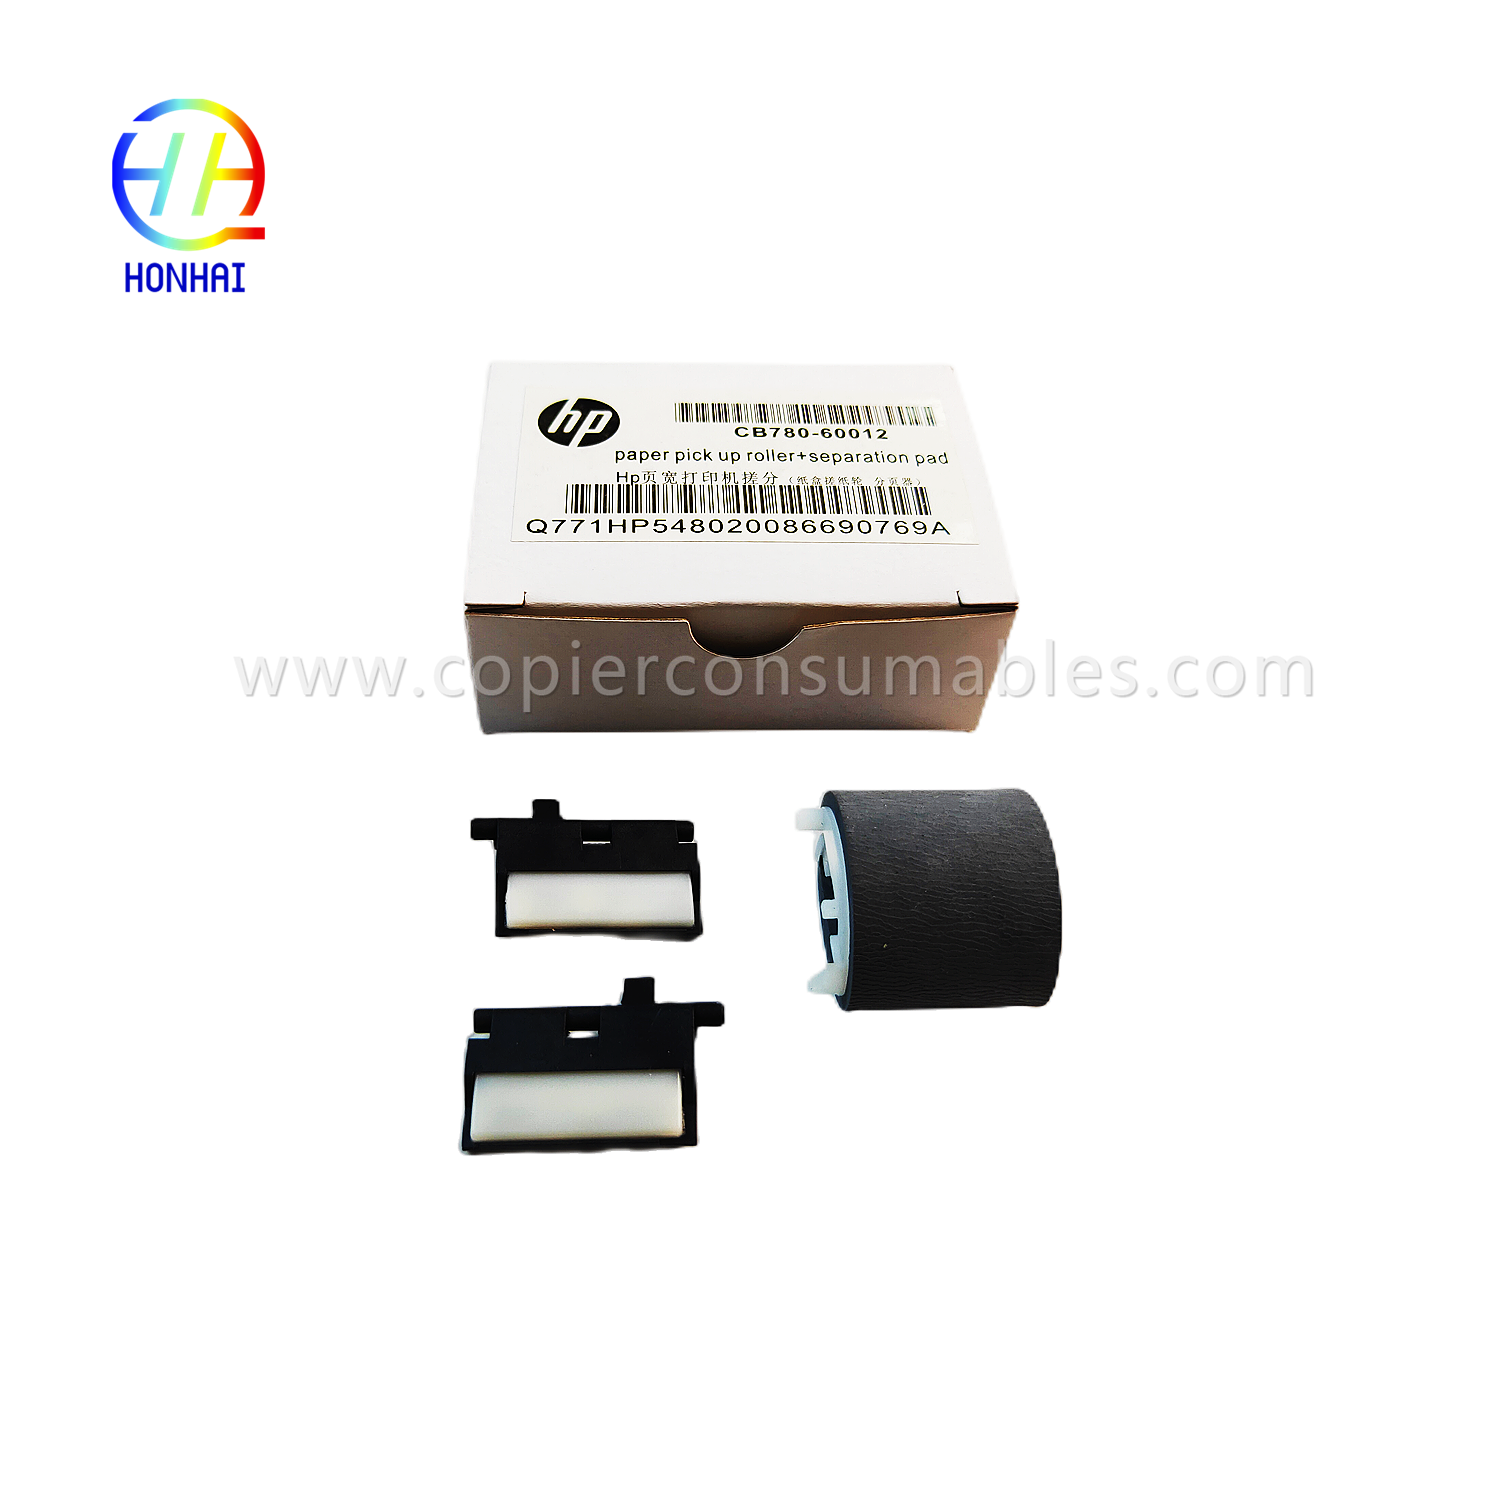 https://www.copierconsumables.com/paper-pickup-roller-separates-pad%ef%bc%88set%ef%bc%89for-hp-pagewide-x585z-x451dn-x476dn-x551dw-x576dw-556dn-586- 452dn-477dn-552-577z-cb780-60012-produk/